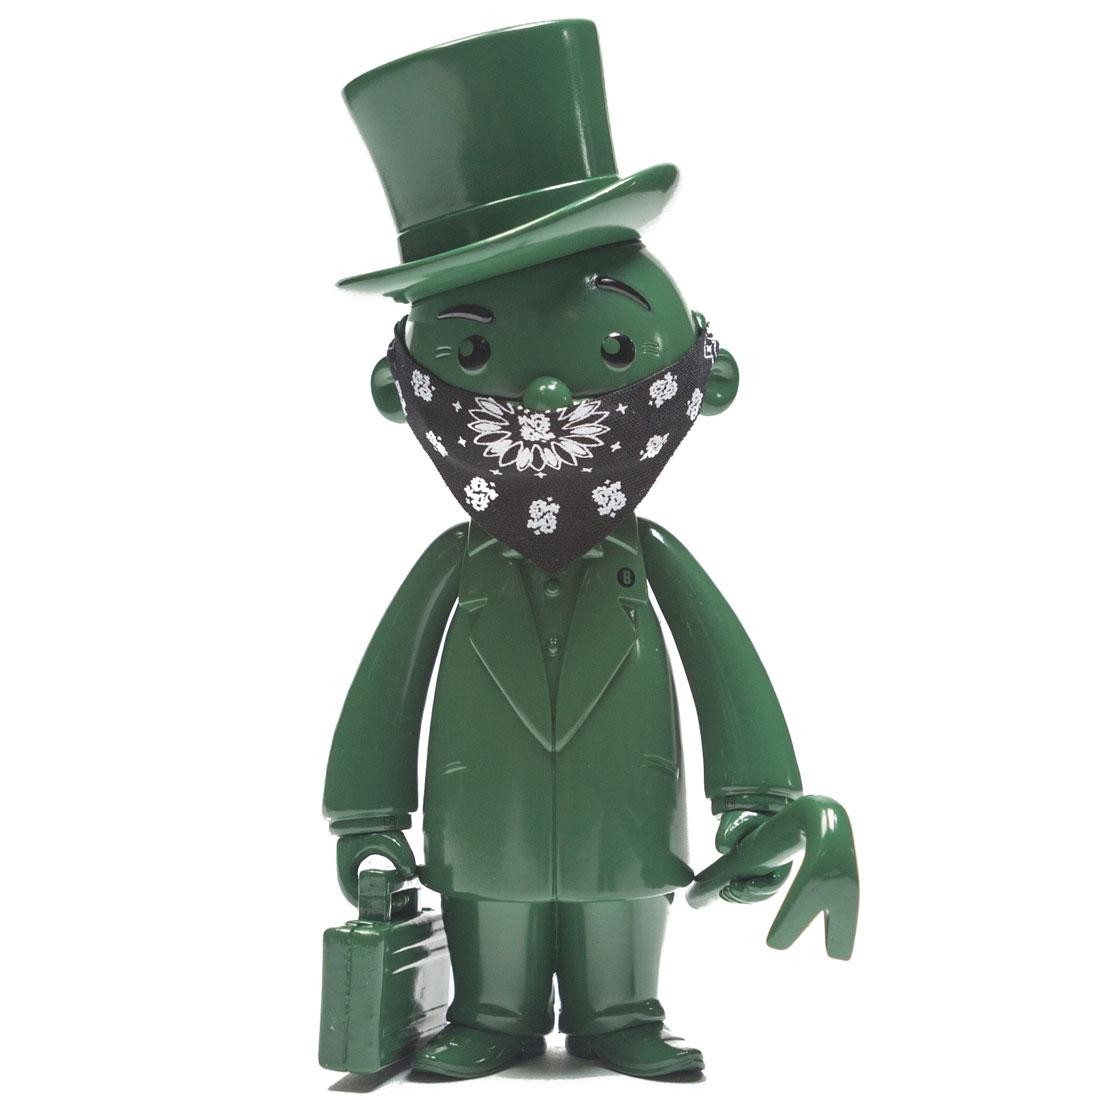 BAIT x Monopoly x Switch Collectibles Mr Pennybags 7 Inch Vinyl Figure - Olive Edition (olive)